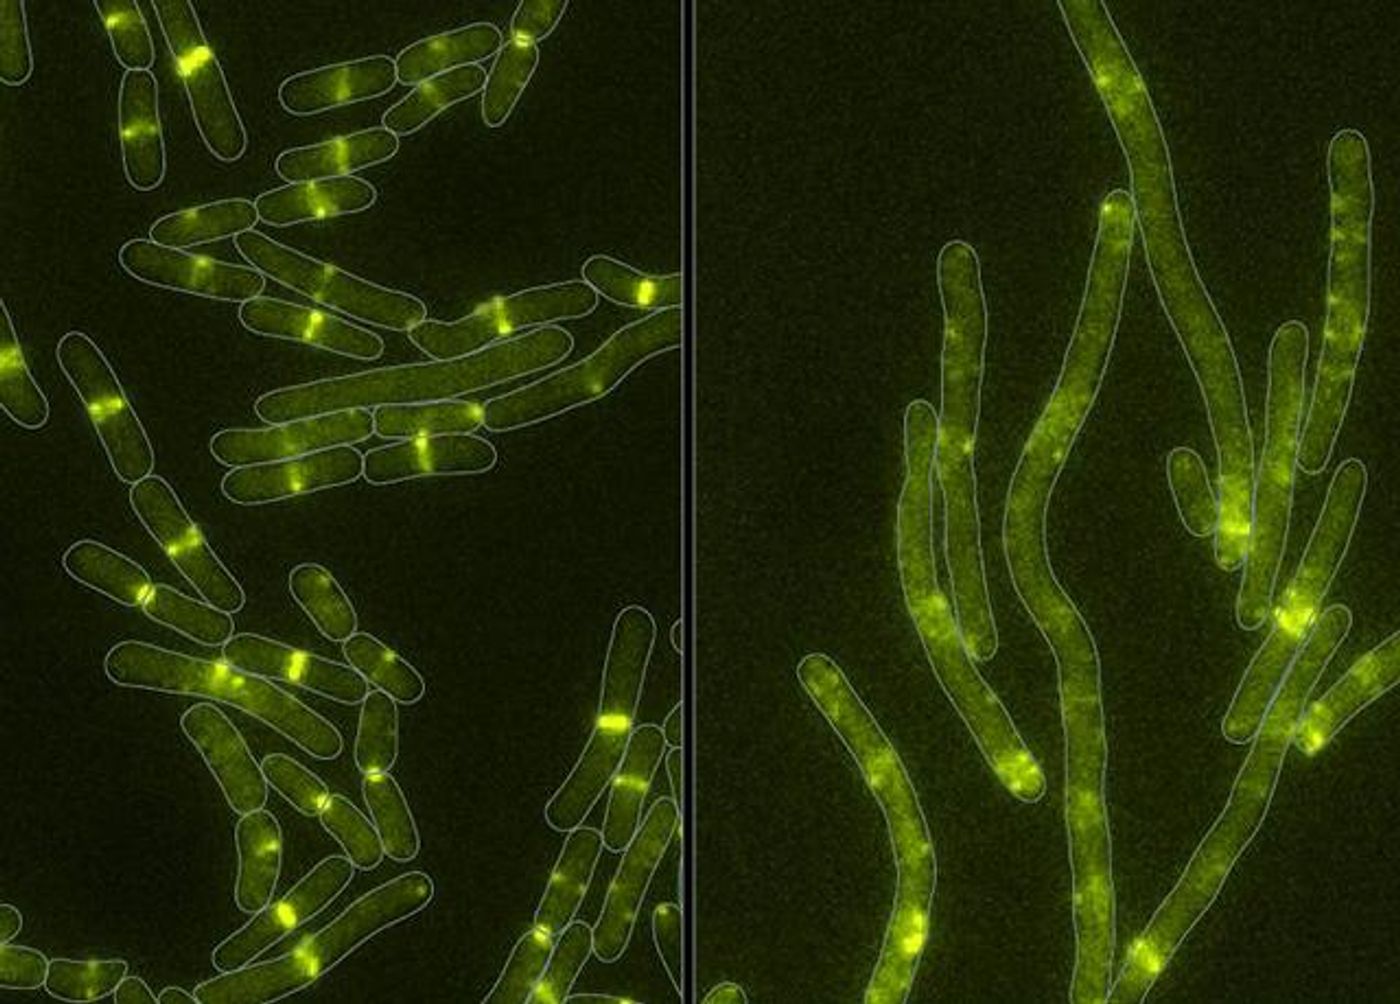 Healthy cells (left) and cells under attack by the newly discovered toxin (right). The protein targeted by the toxin is labeled with green fluorescent protein. The toxin disrupts the structure made by this protein at the center of the cell. Without this structure, cells cannot divide. Instead, they grow longer until eventually they break apart and die.  / Credit: Mougous Lab/UW Medicine